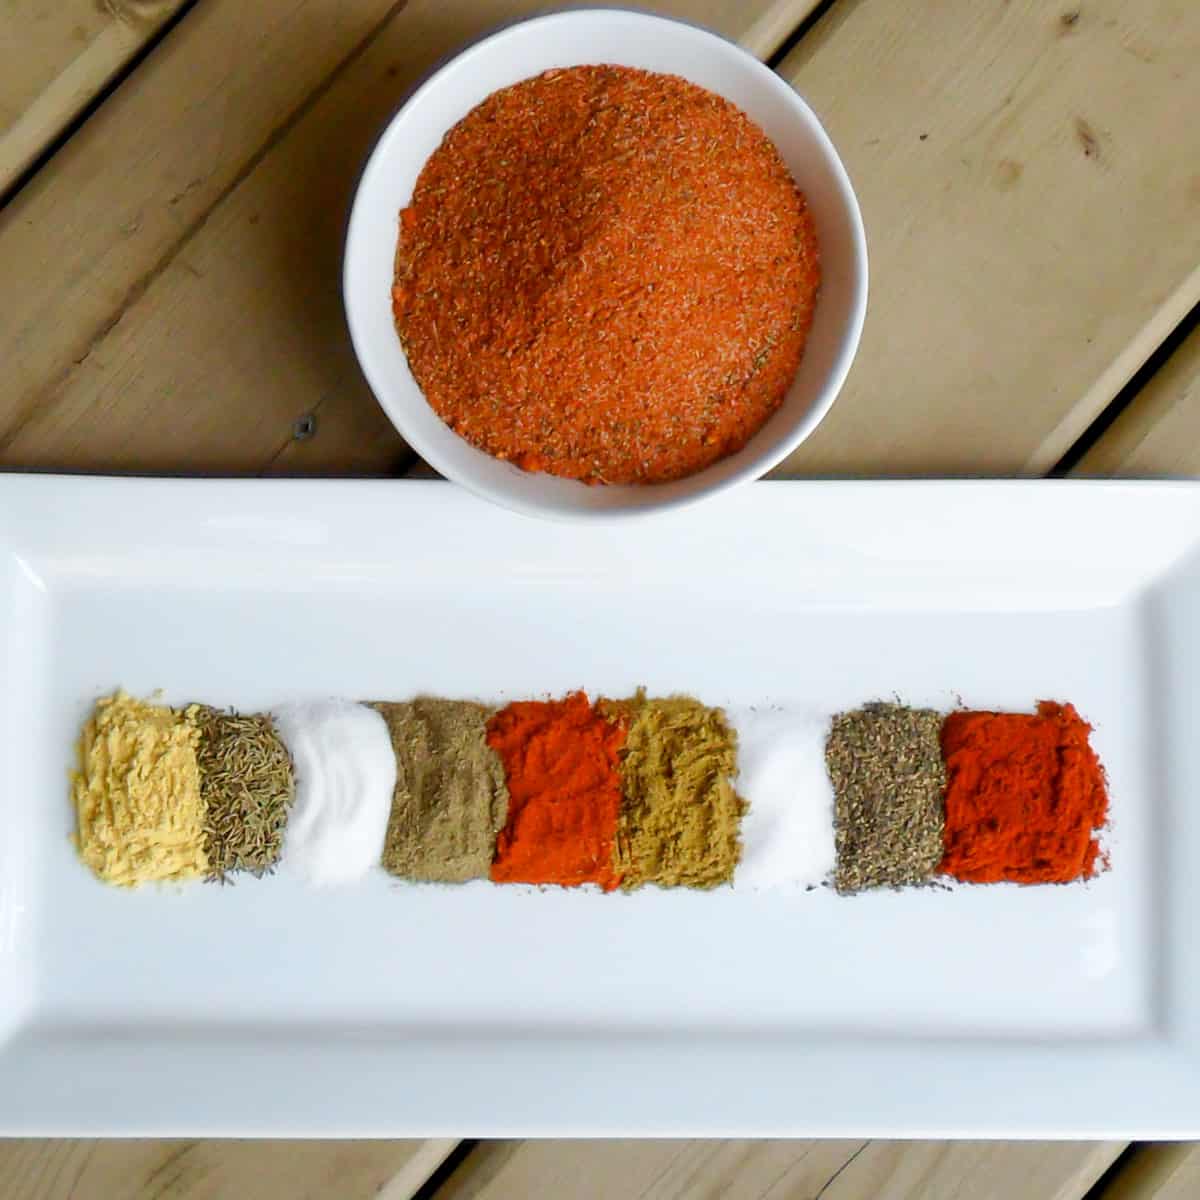 Spices divided and aligned on a rectangular plate.